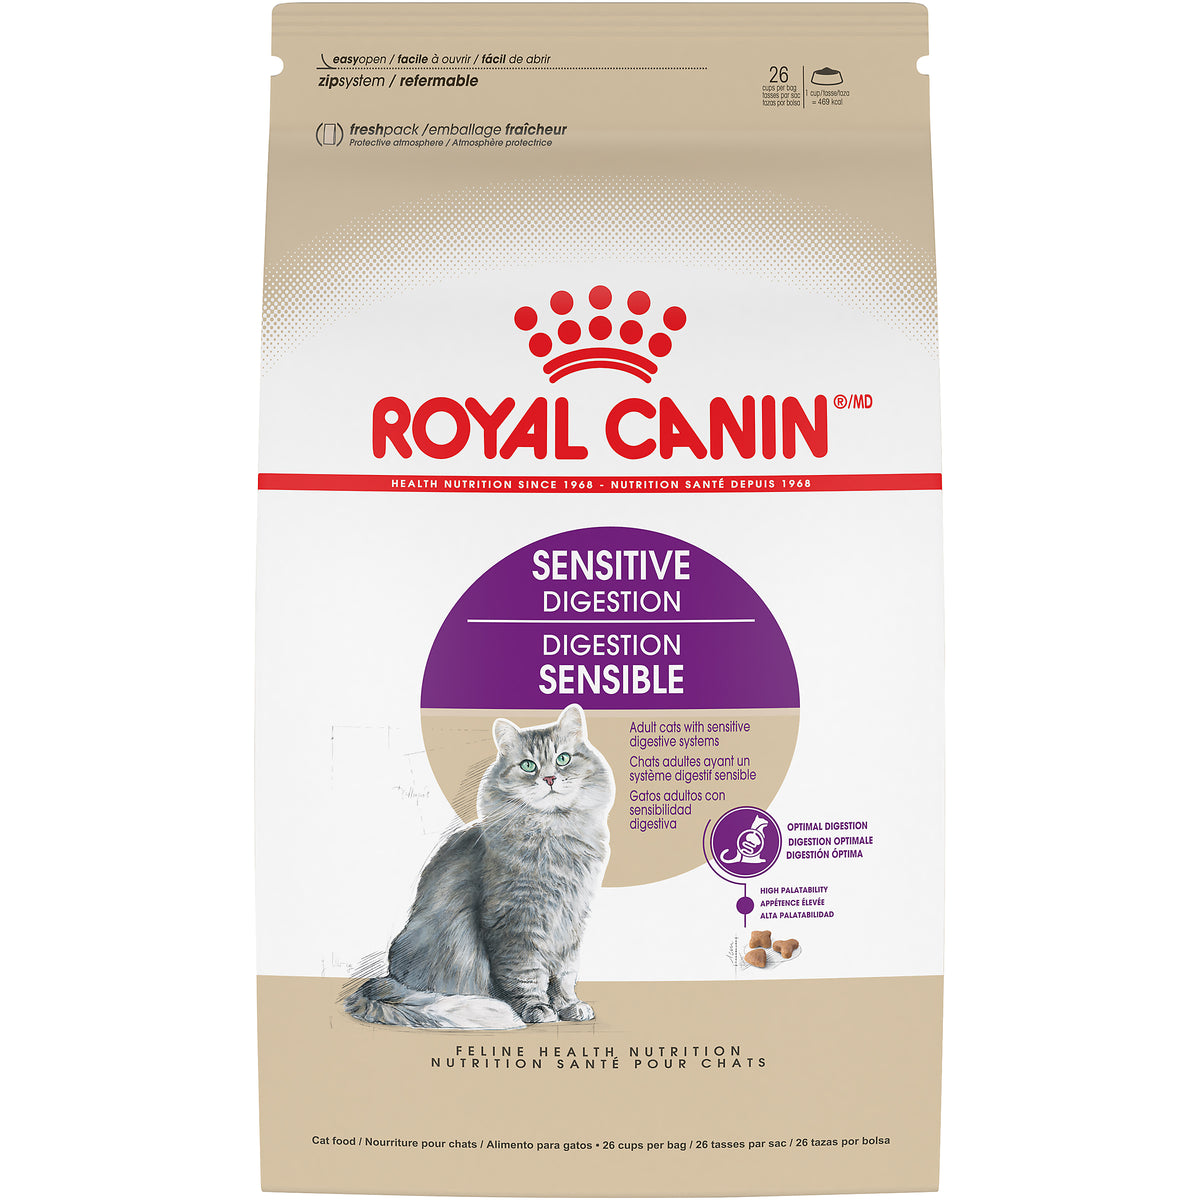 Royal Canin Sensitive Digestion / Special Cat Food